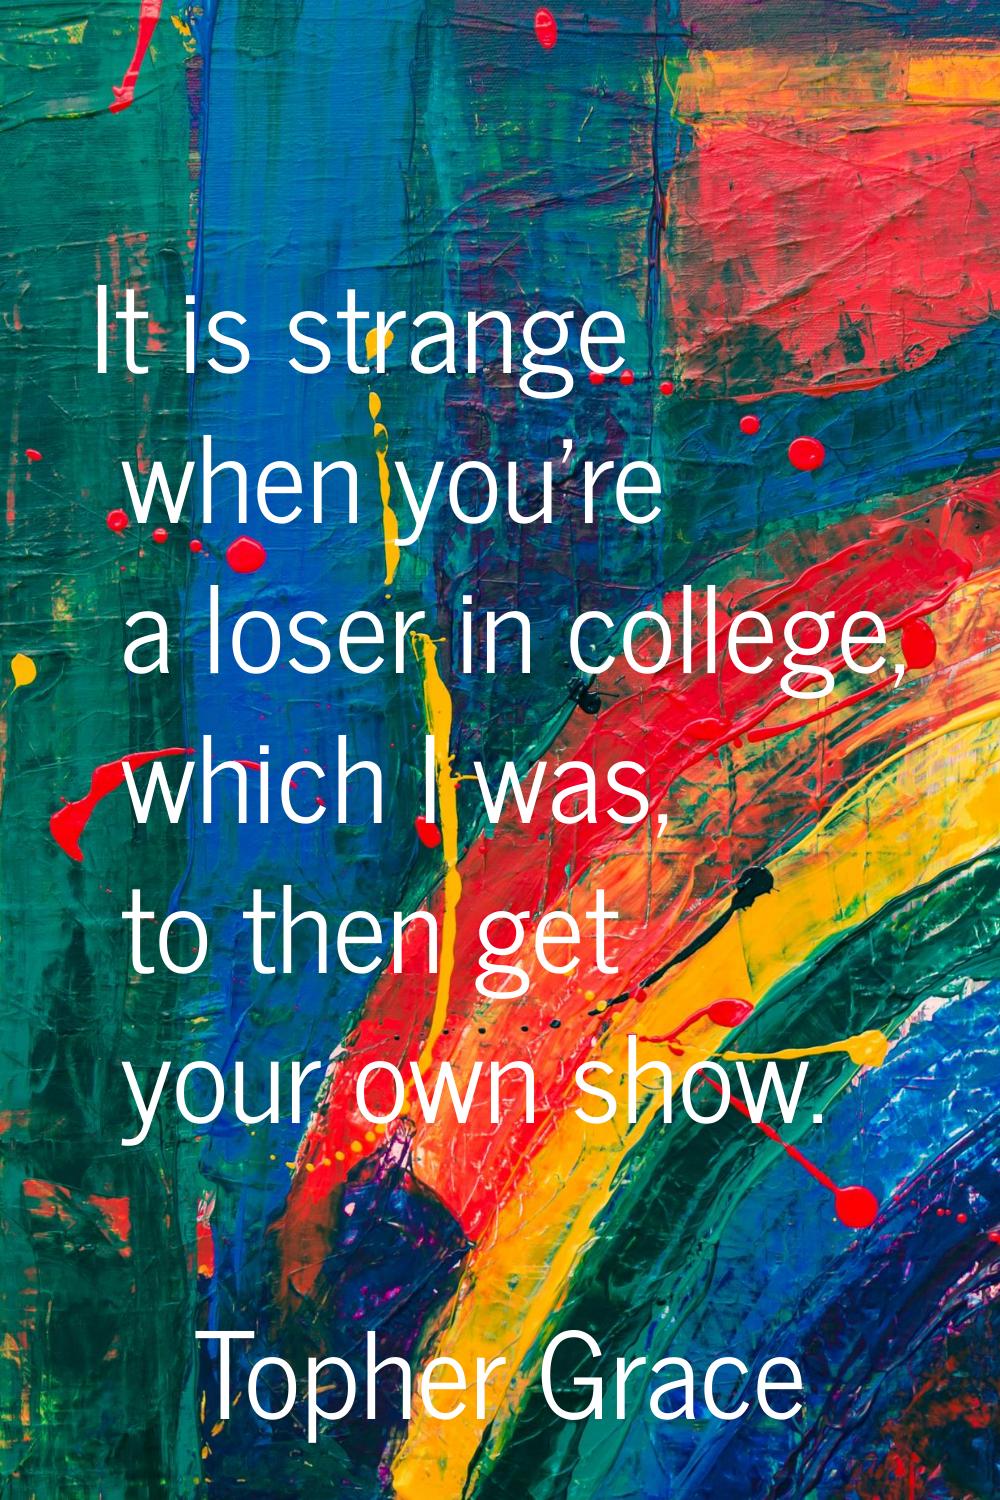 It is strange when you're a loser in college, which I was, to then get your own show.